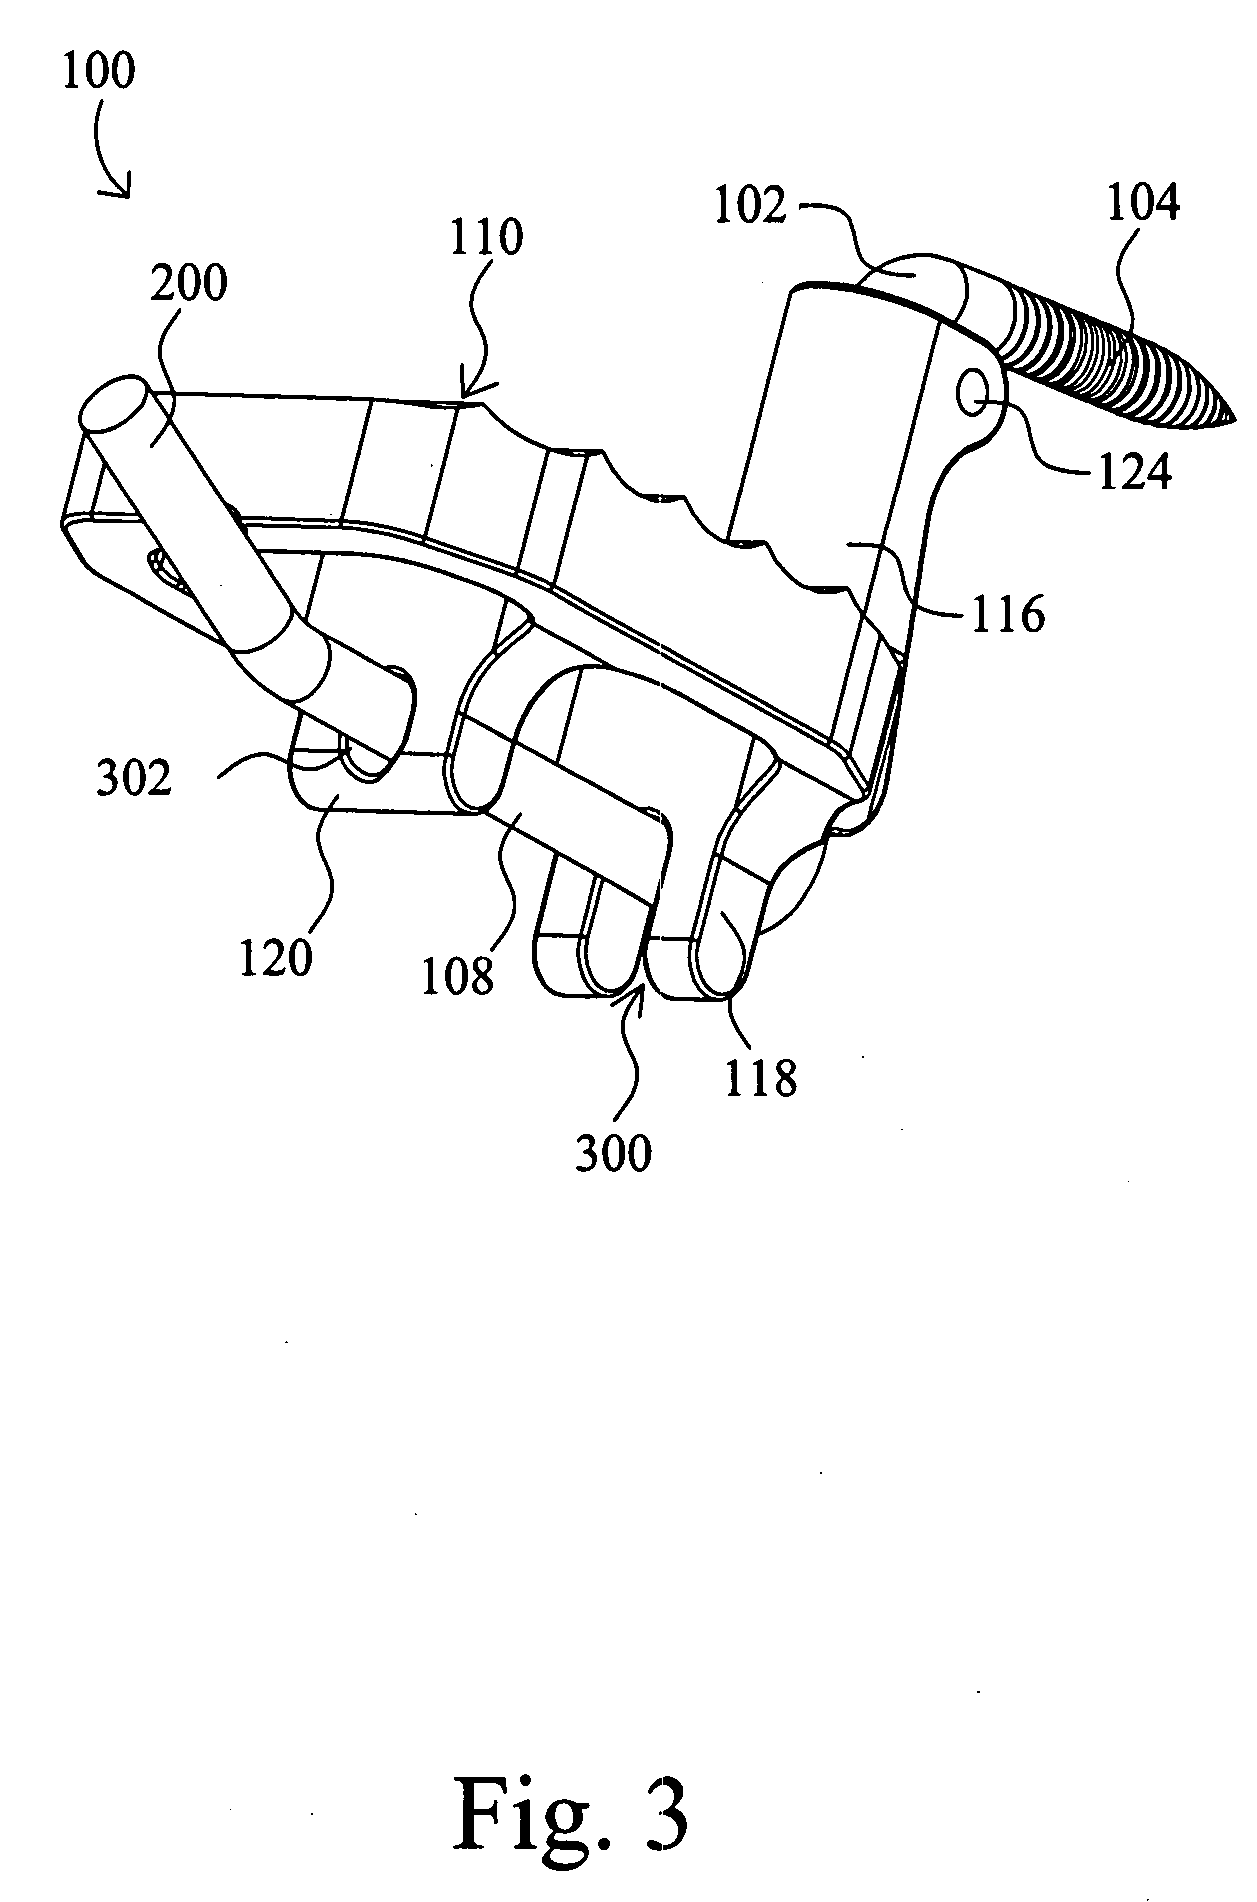 Climbing foot and/or hand support